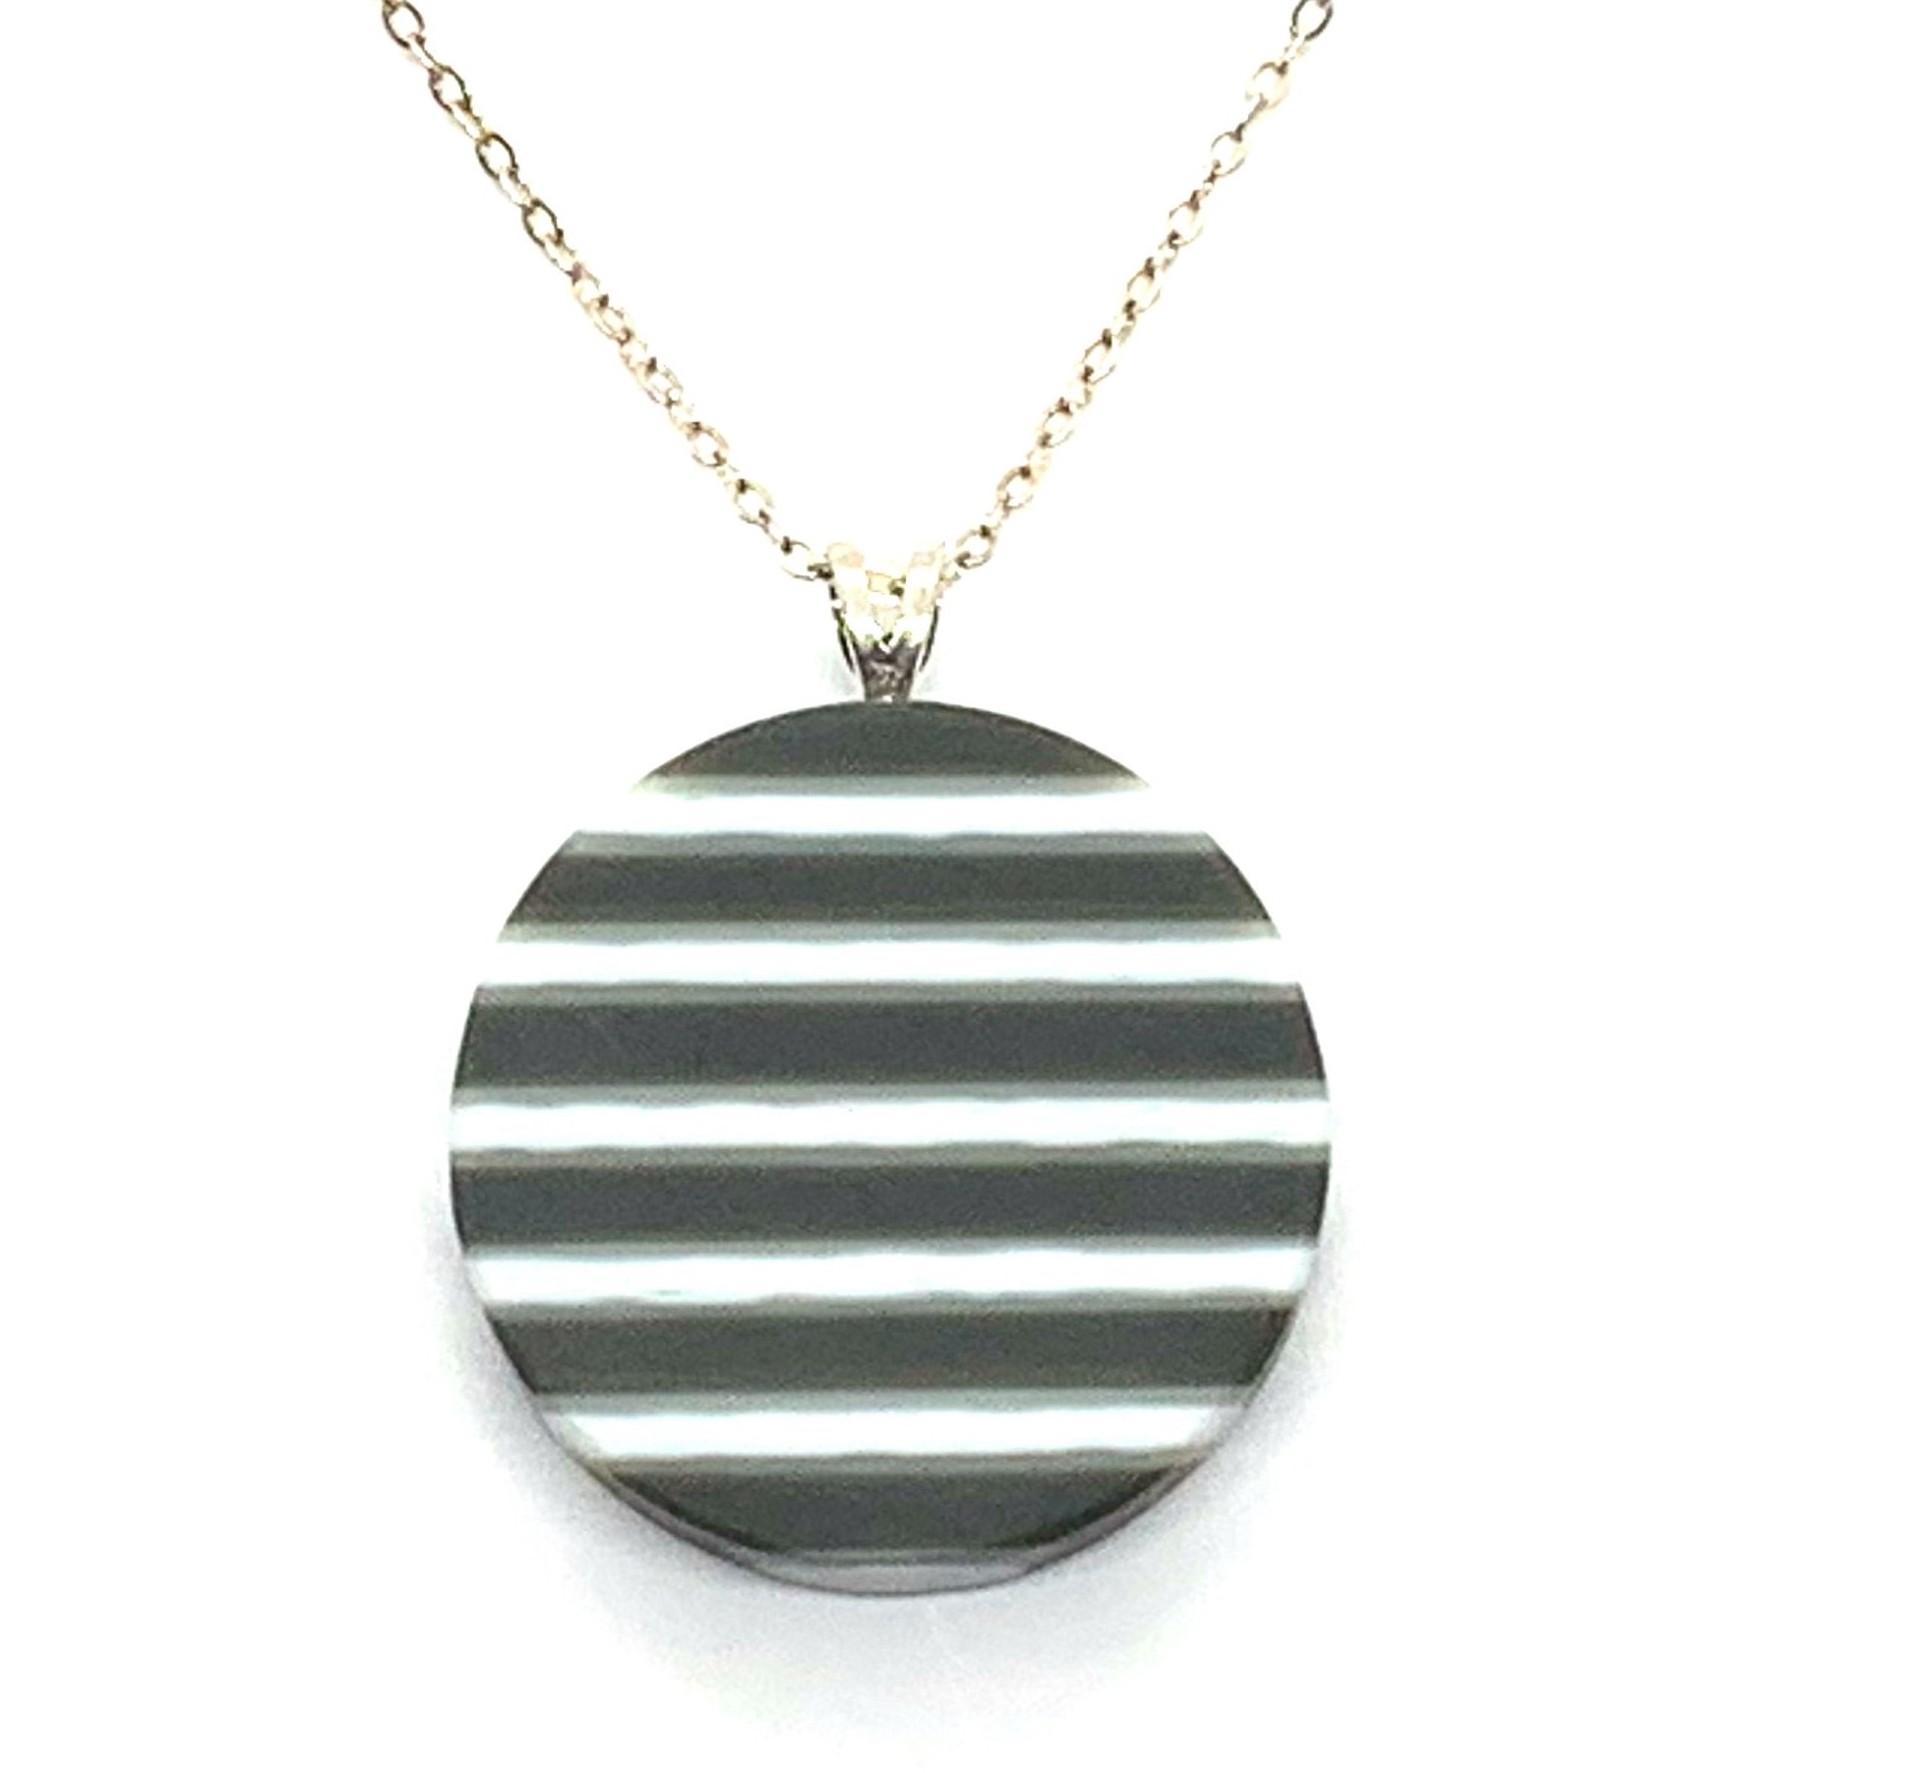 On Edge Necklace by Chris Cox